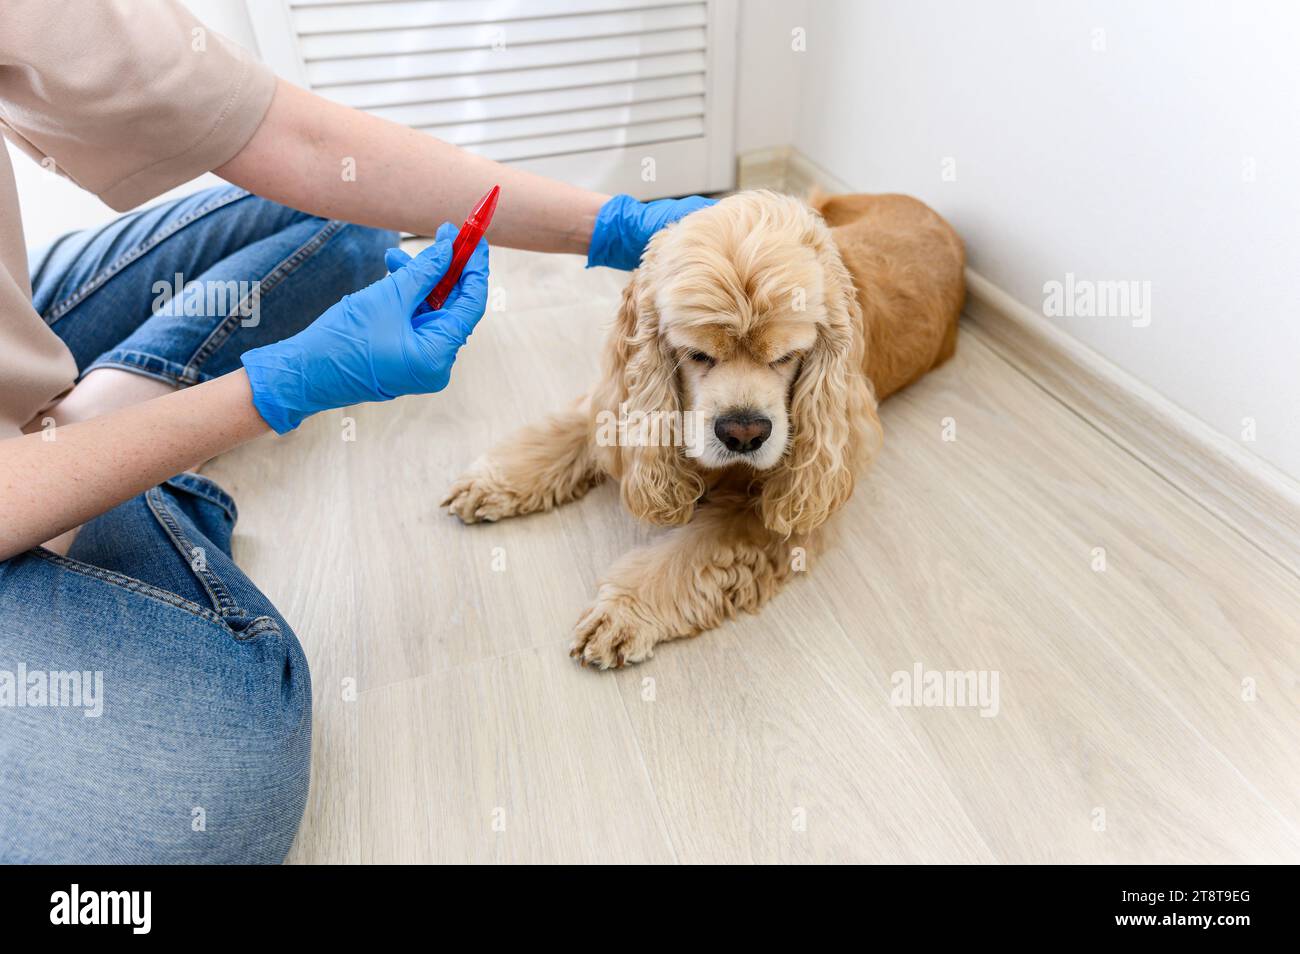 A woman applies flea and tick treatment to her dog's fur. Stock Photo